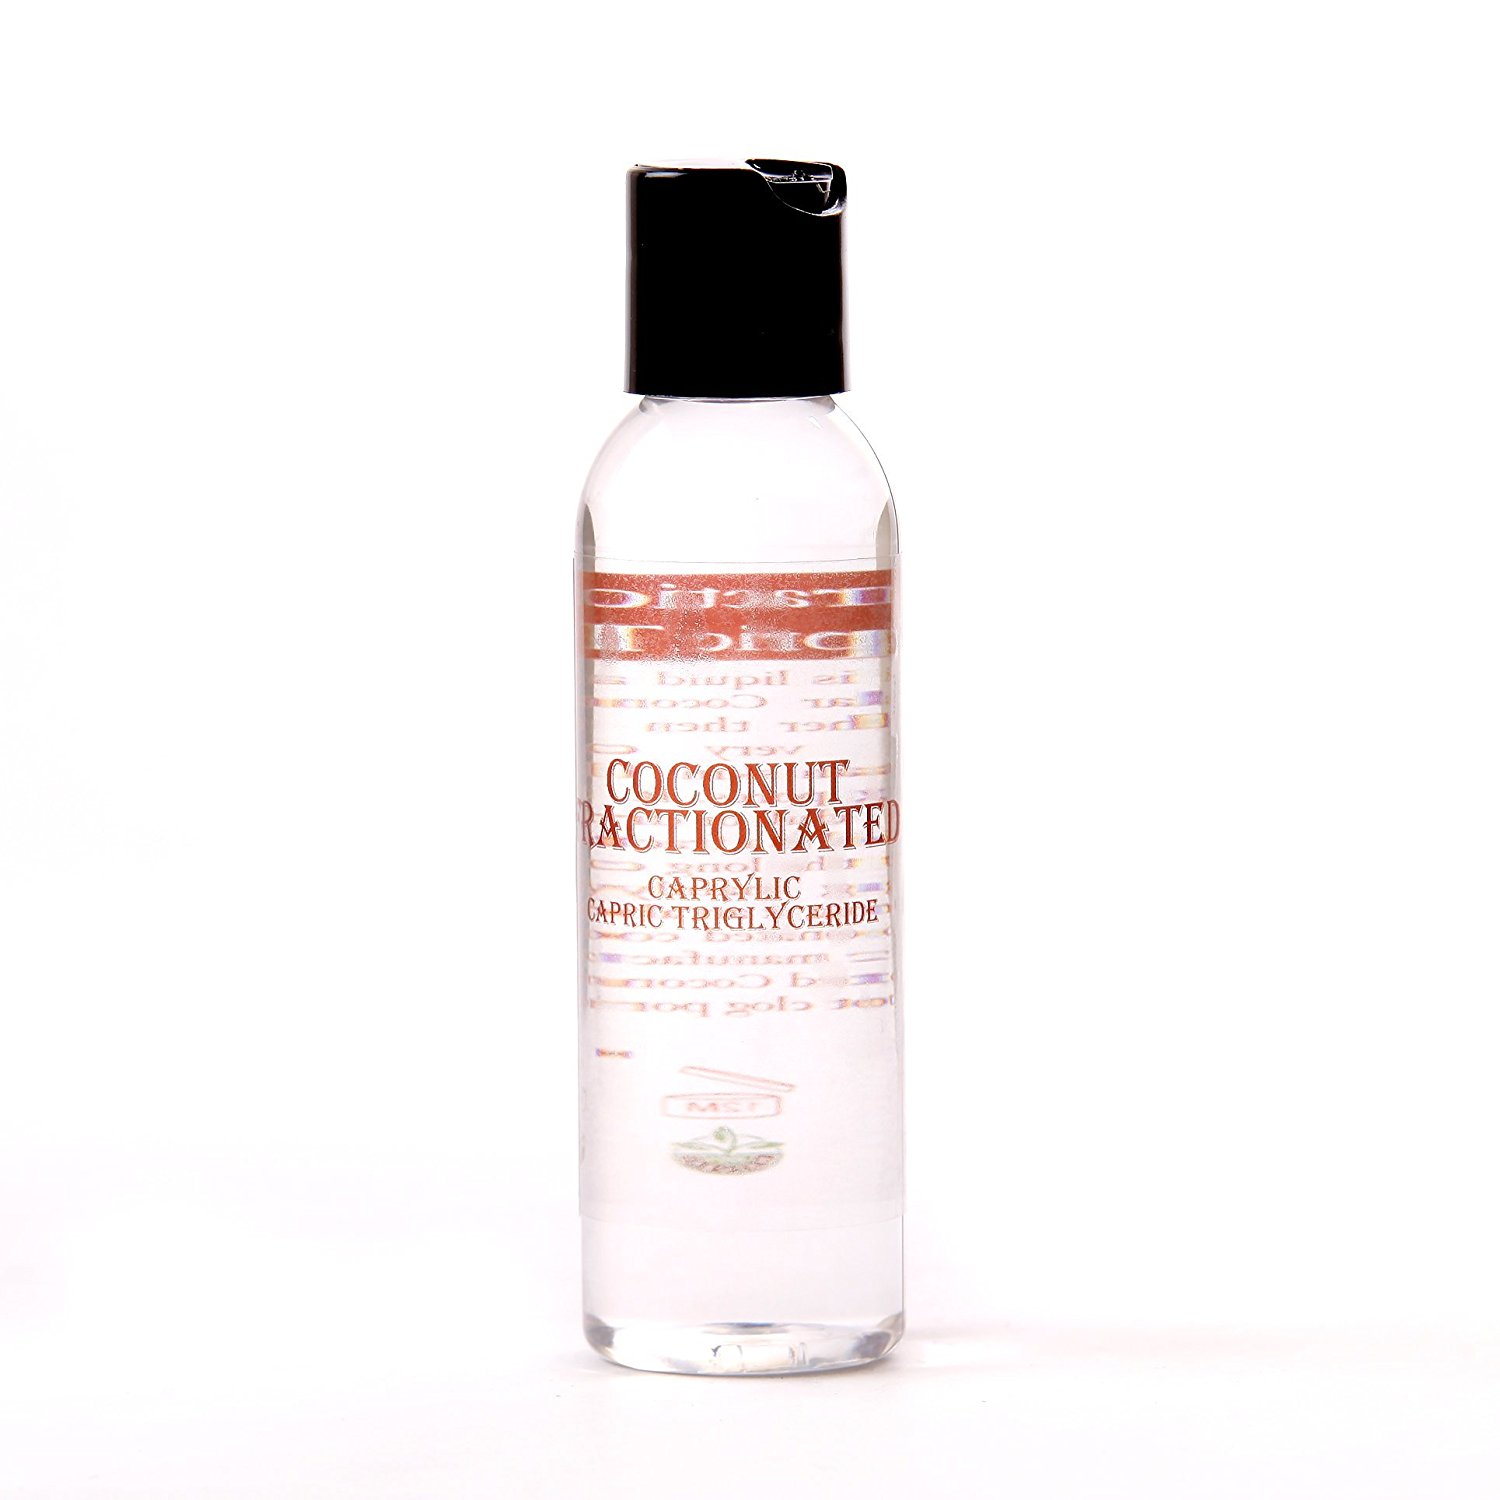 Coconut Fractionated Carrier Oil 125ml - 100% Pure